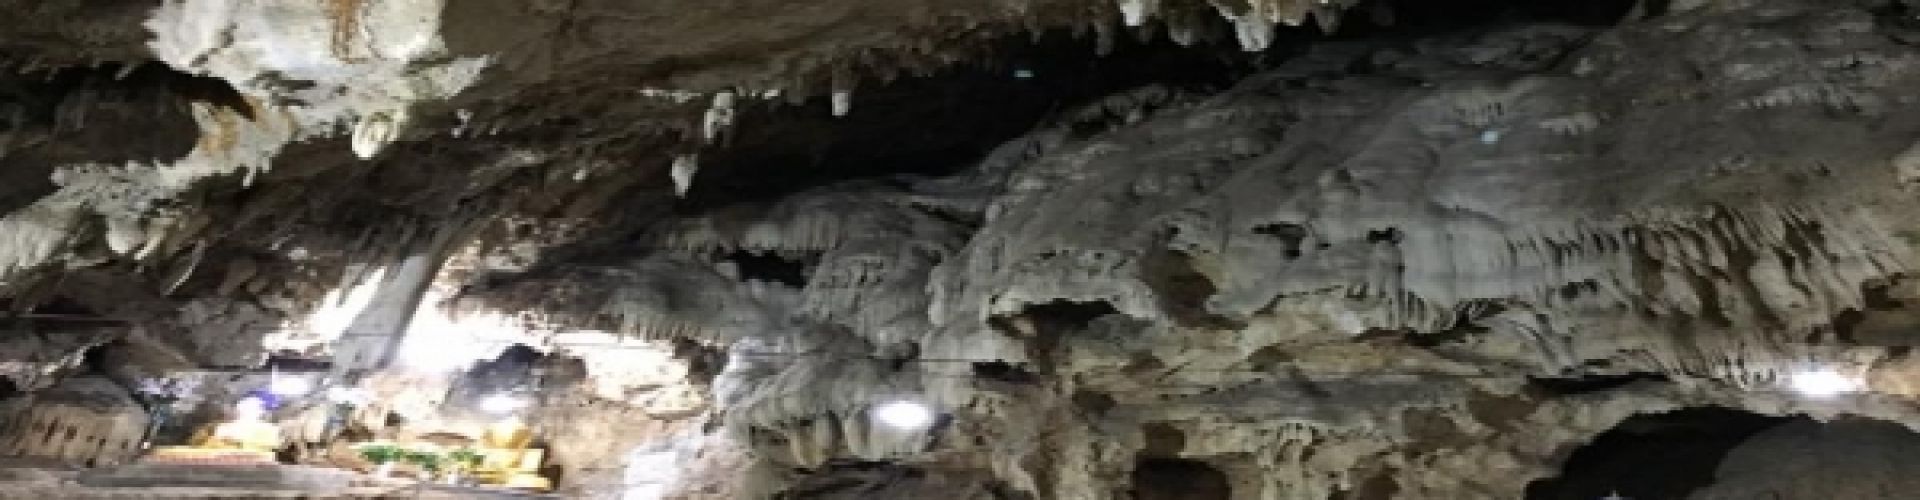 Destinations in Aung Tha Pyay Cave